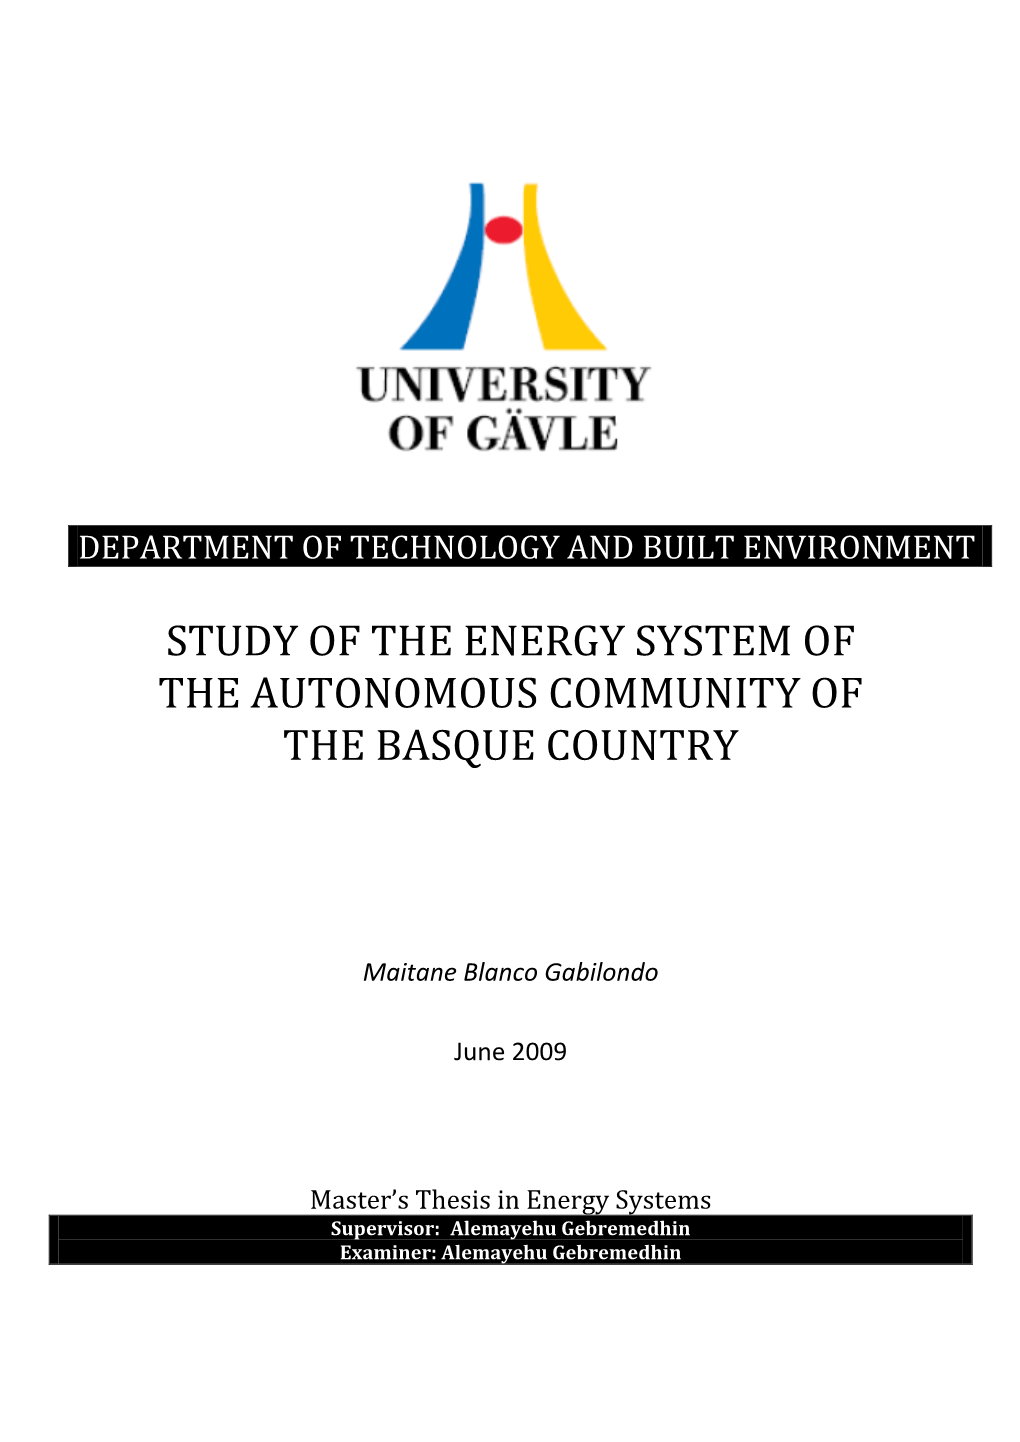 Study of the Energy System of the Autonomous Community of the Basque Country